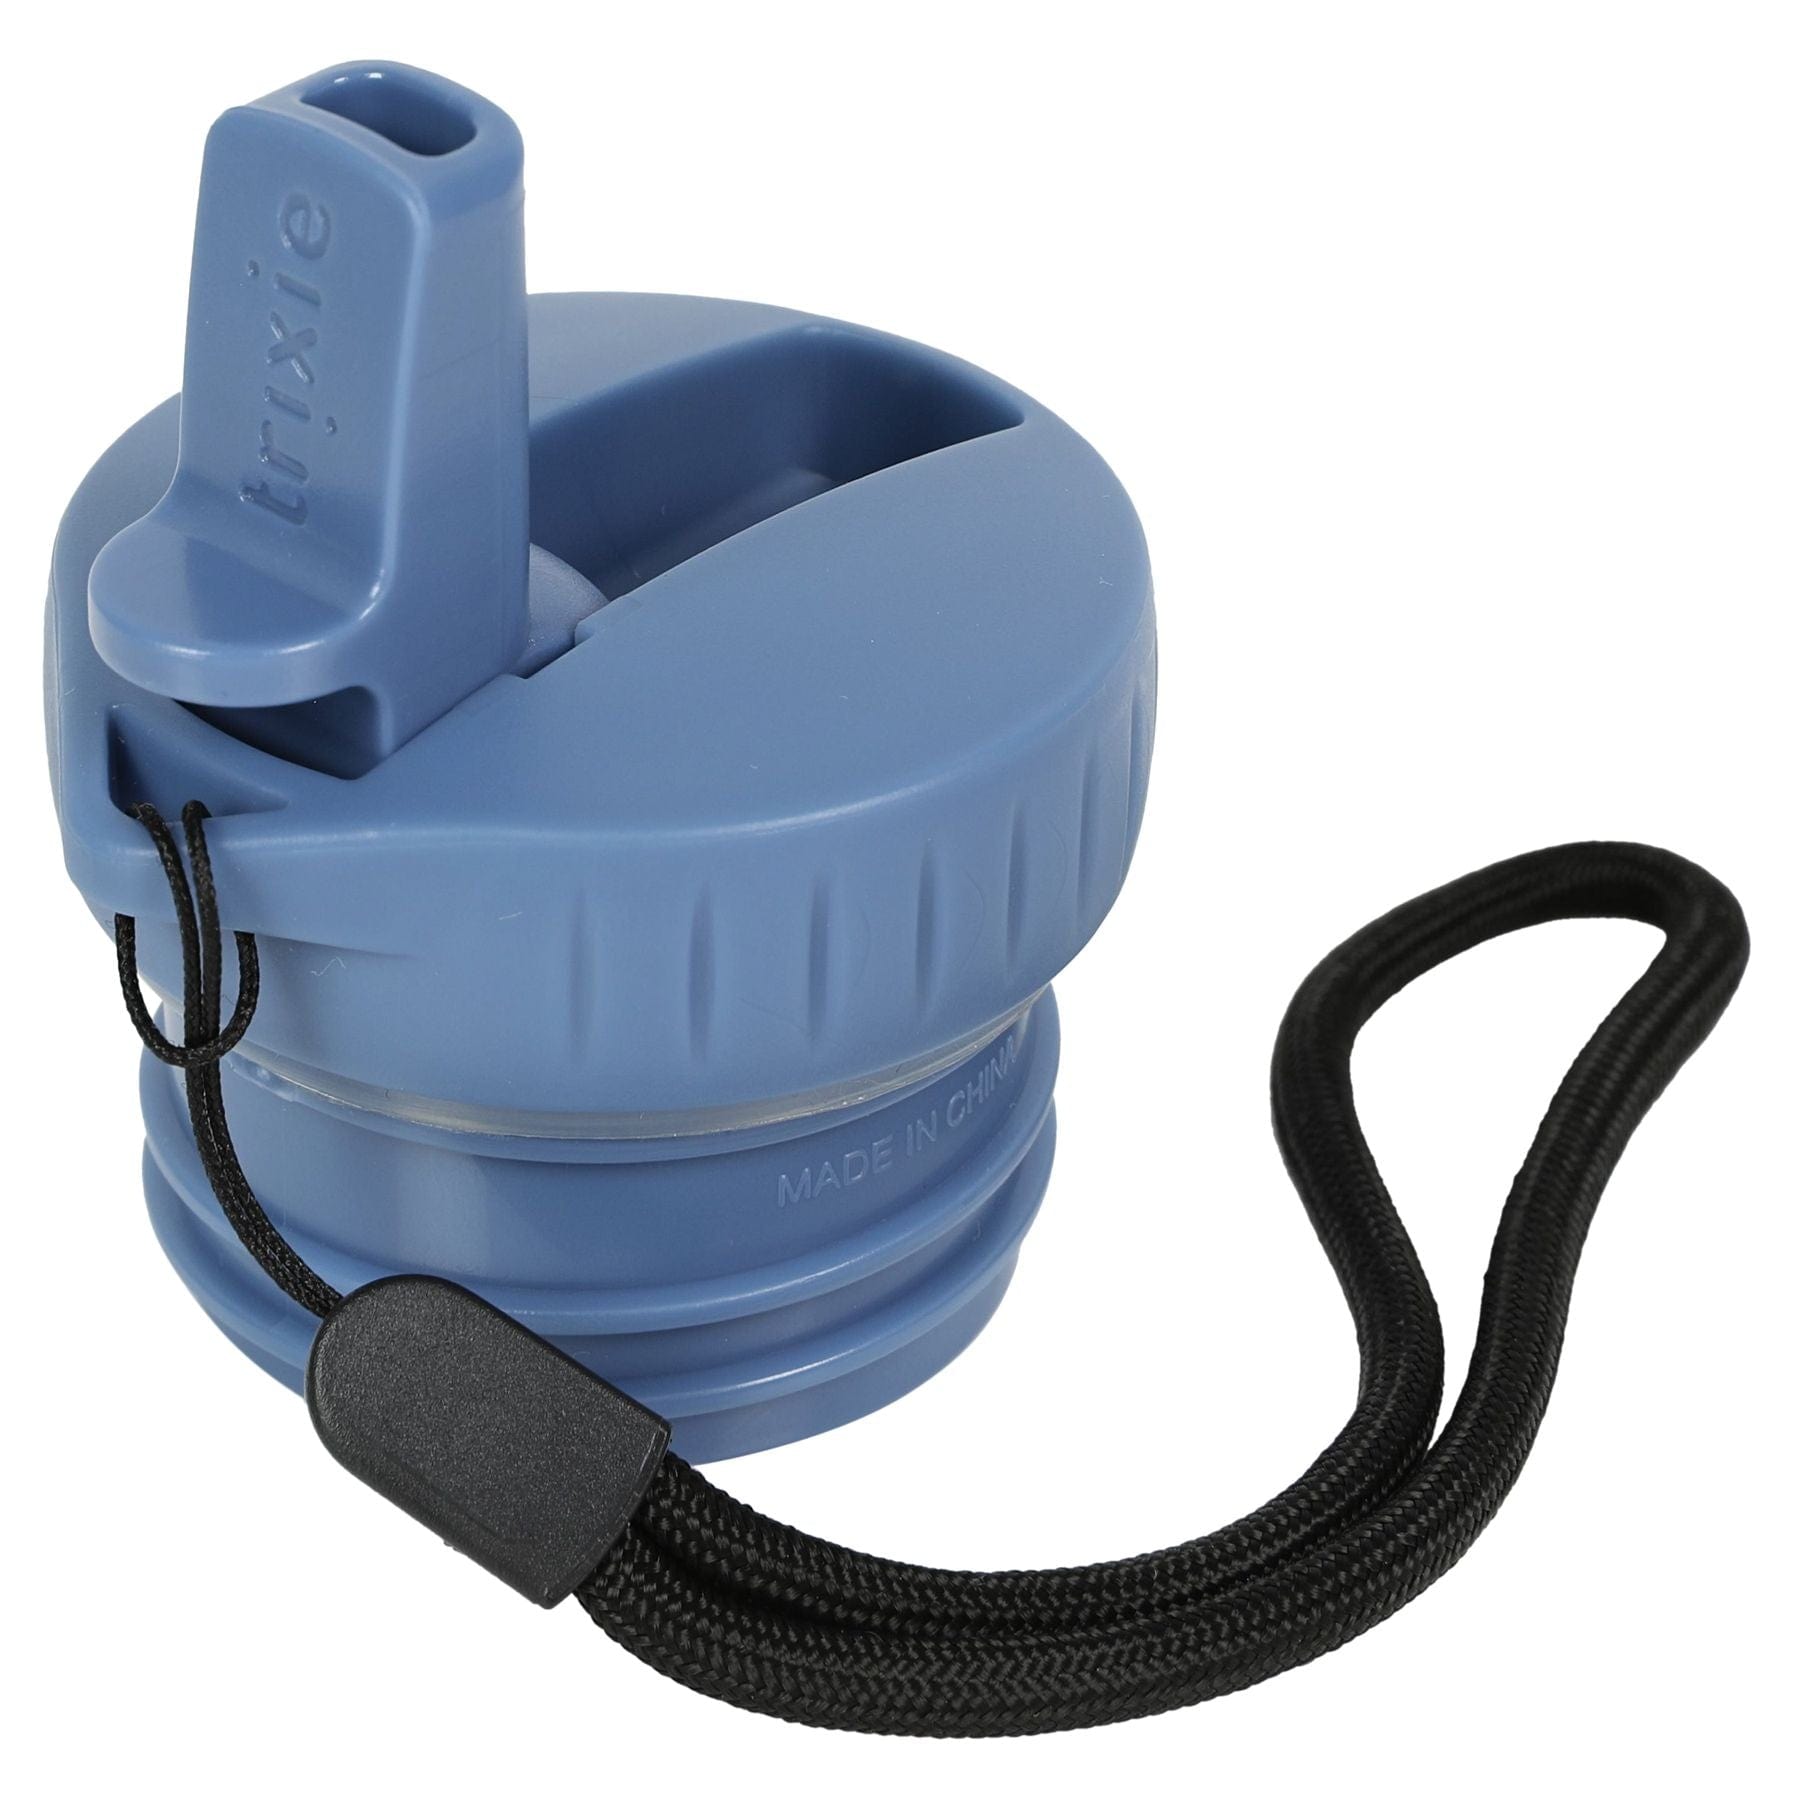 Cap with Drinking Spout